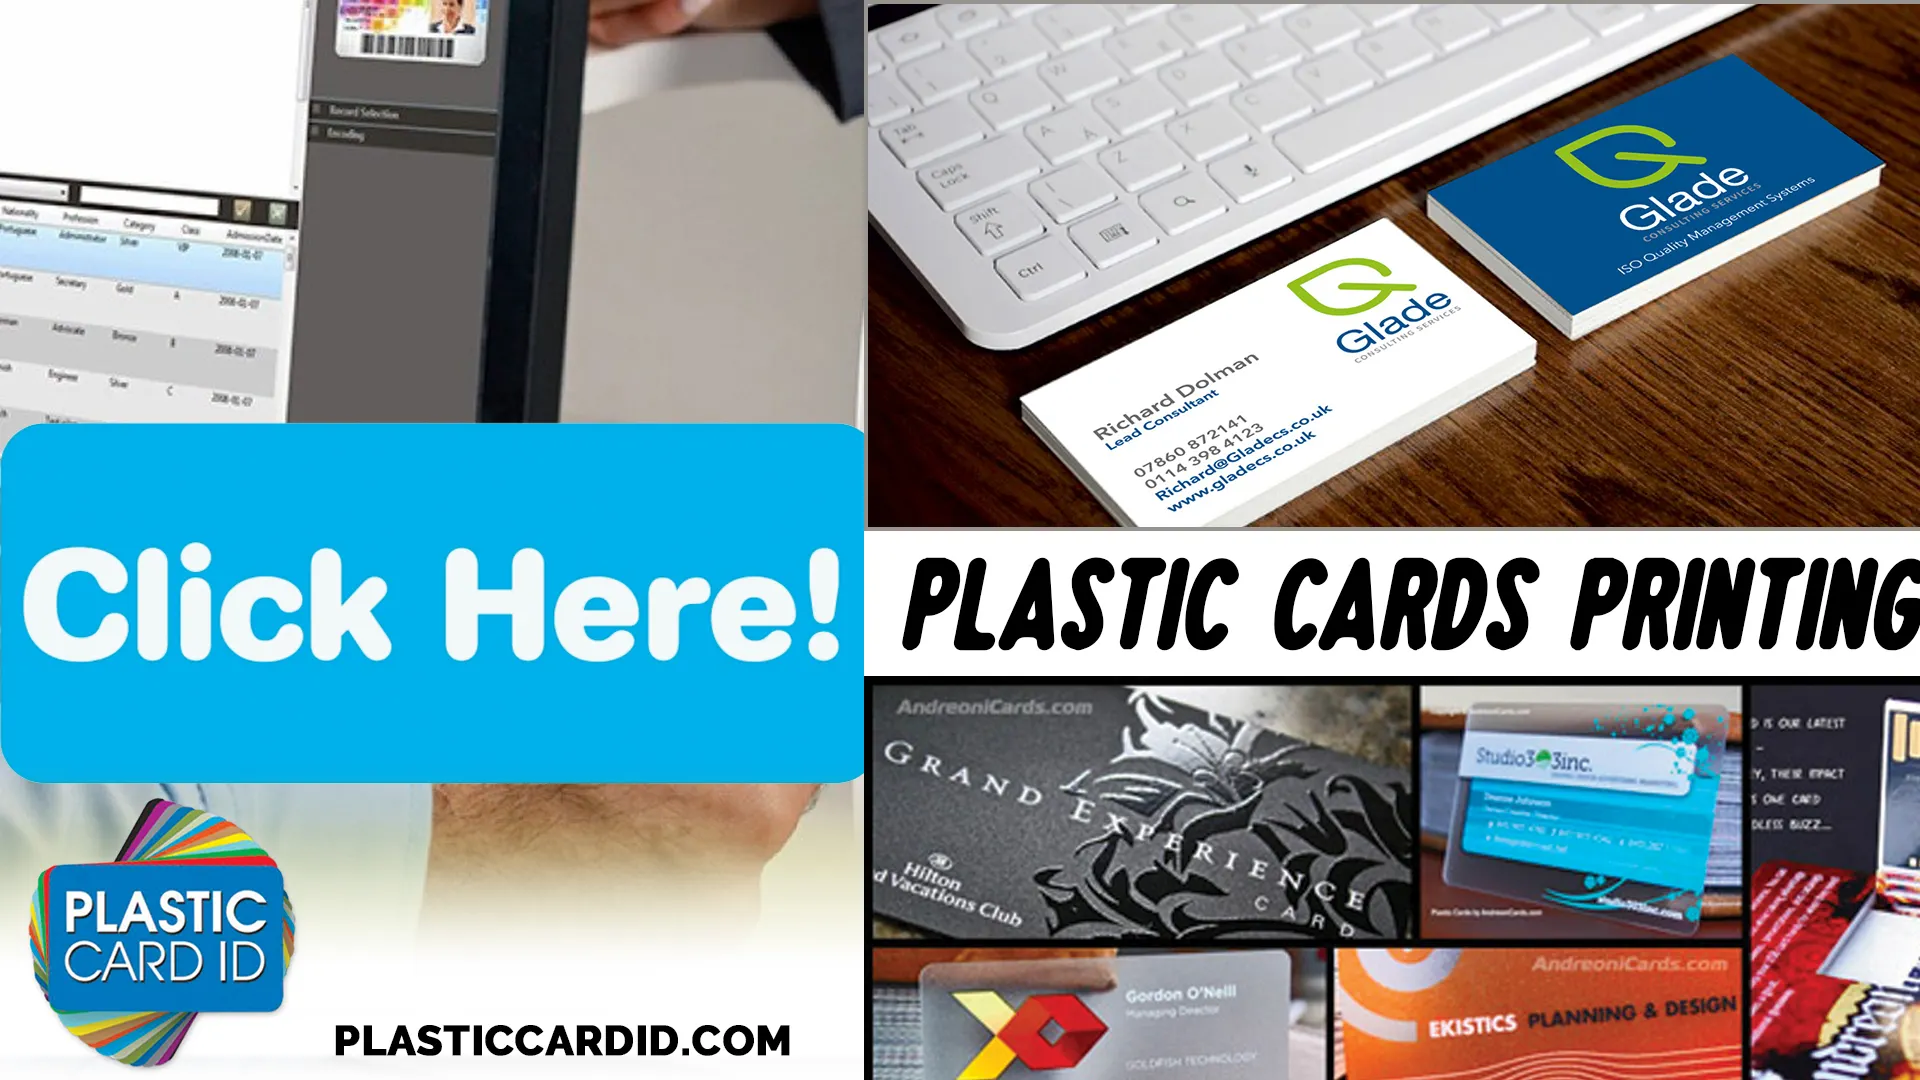 The Bold Future of Plastic Card ID
: Innovations on the Horizon